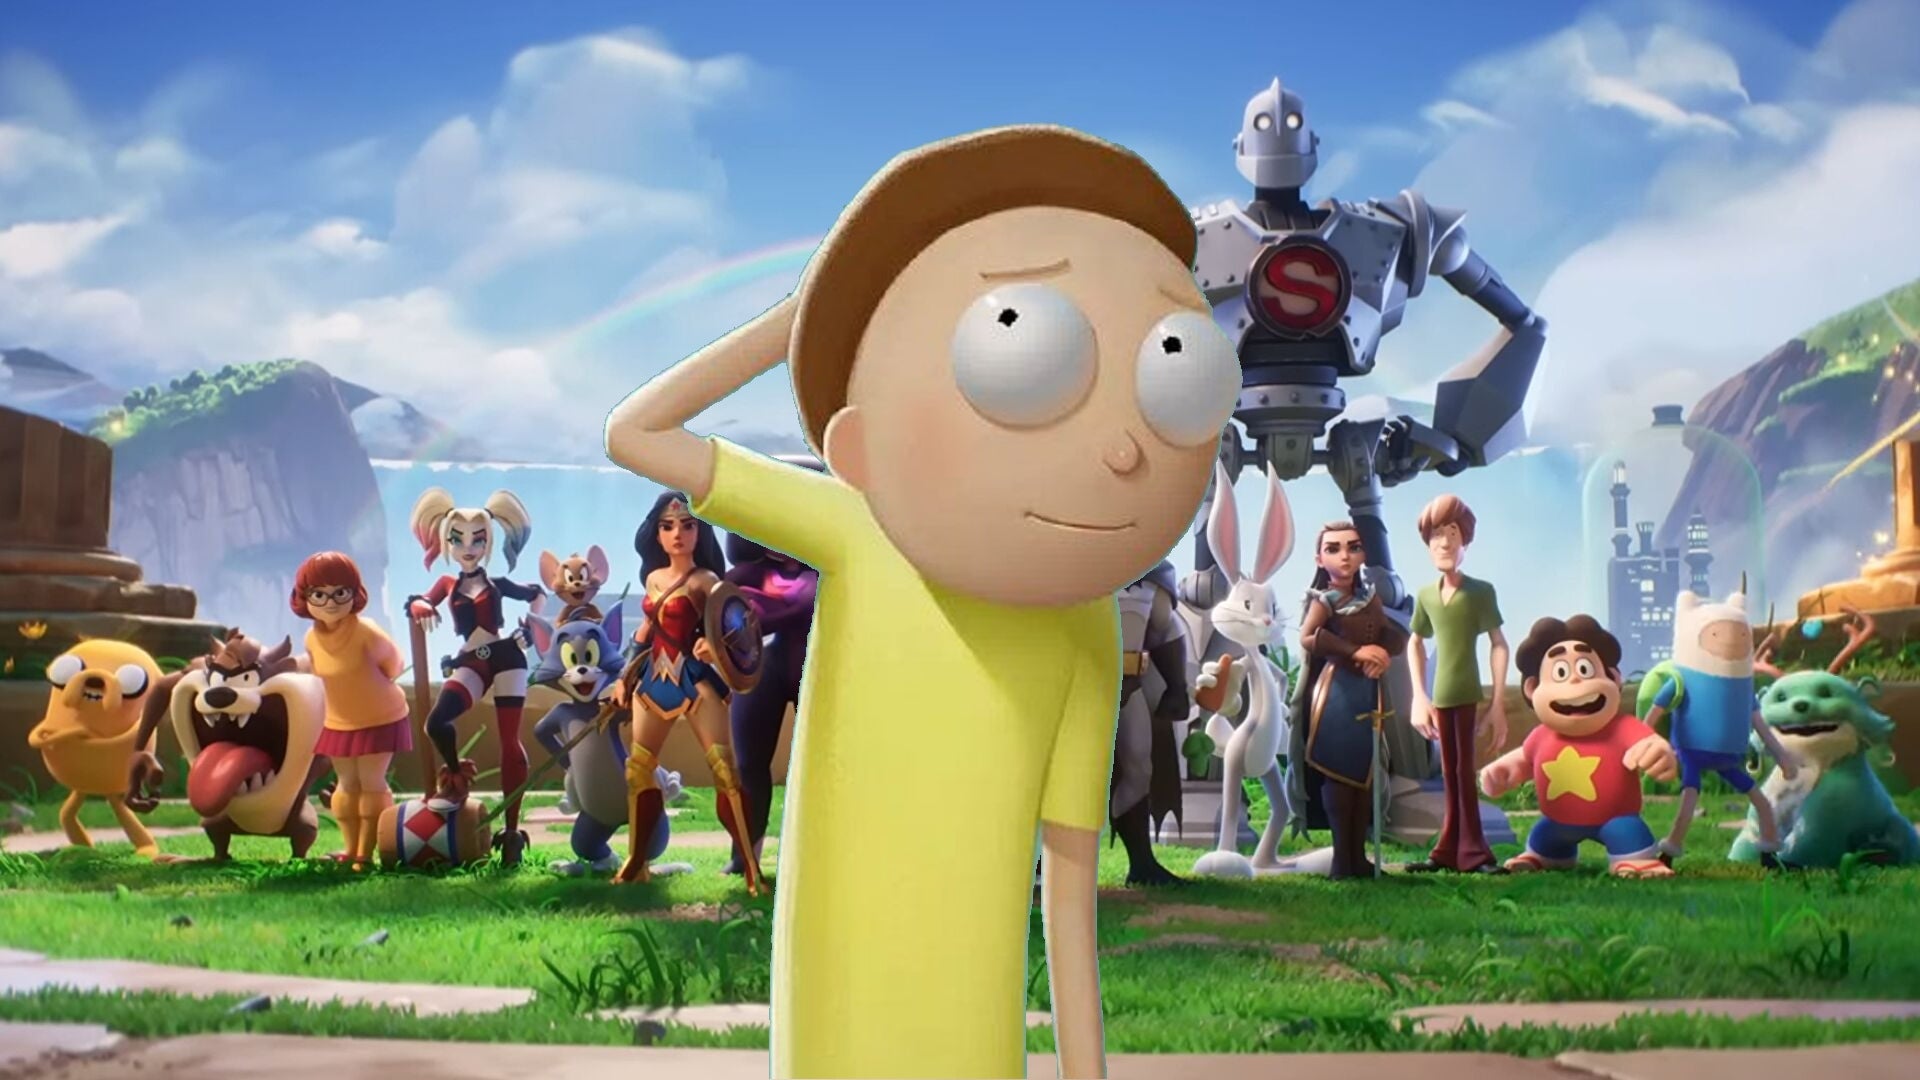 Rick And Morty's Morty Smith arrives in free-to-play brawler MultiVersus on August 23rd, 2022.